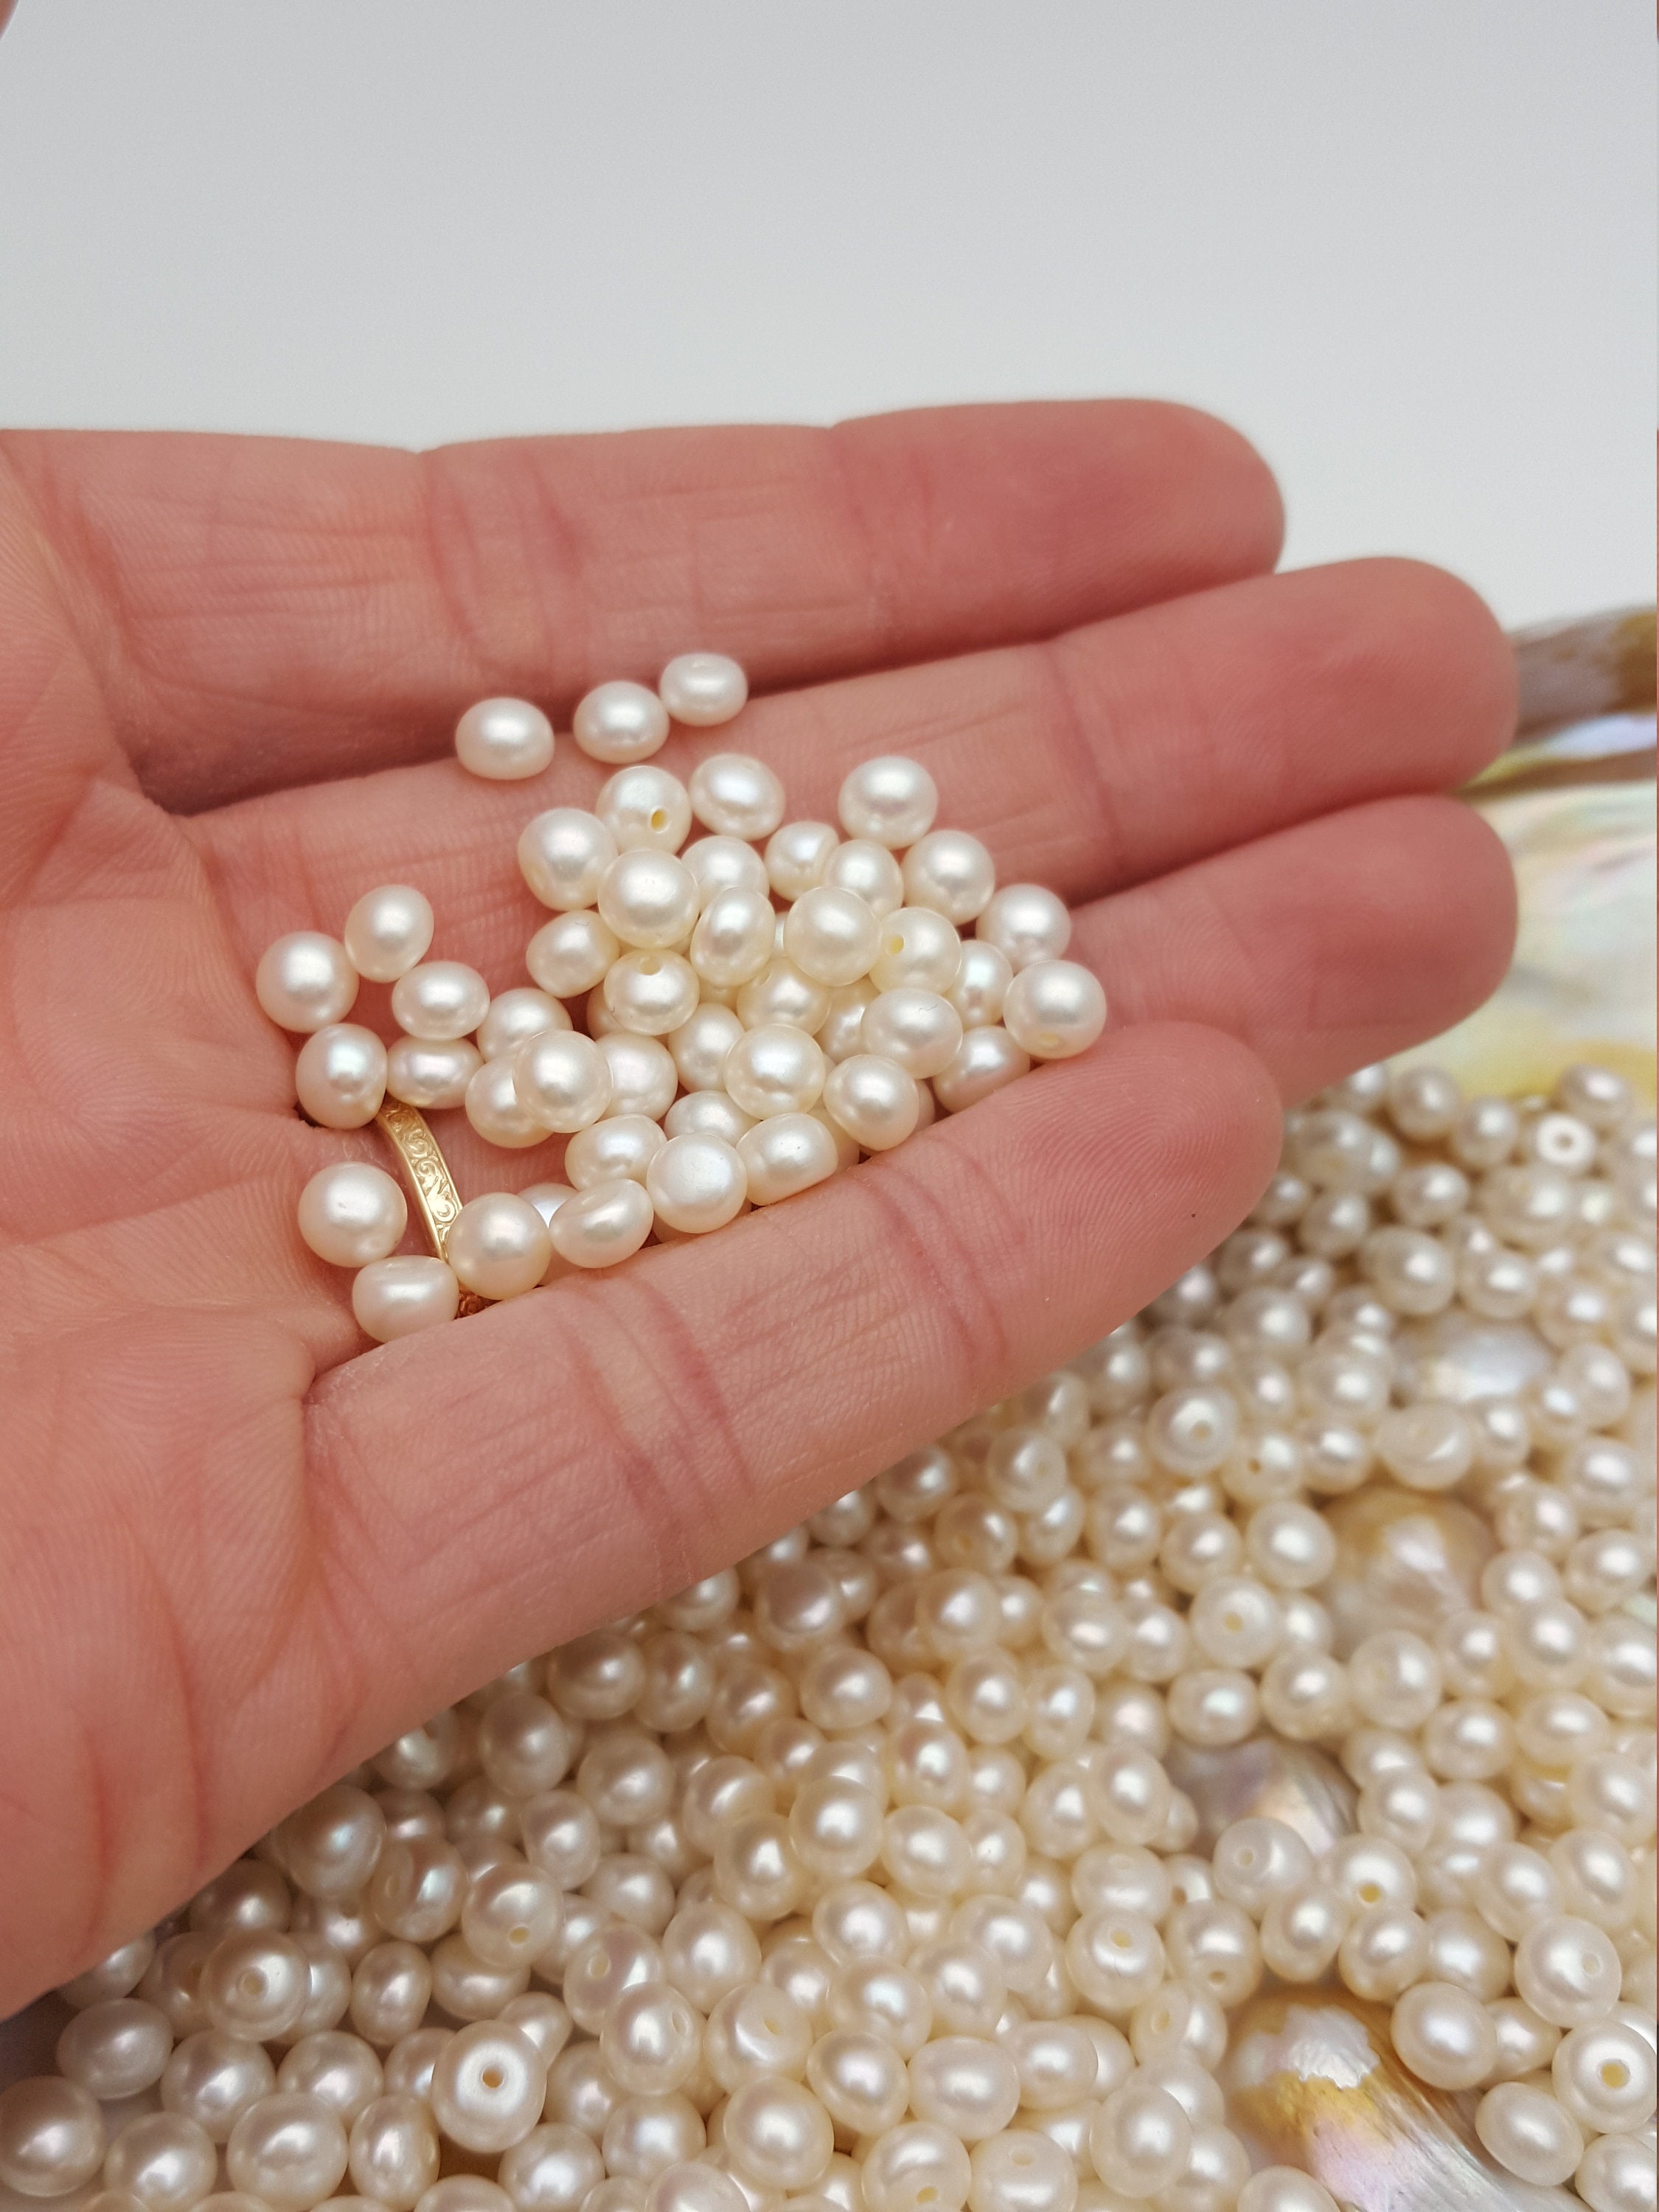 Freshwater 6mm White Button Half-Drilled Pearls (4 Pairs)